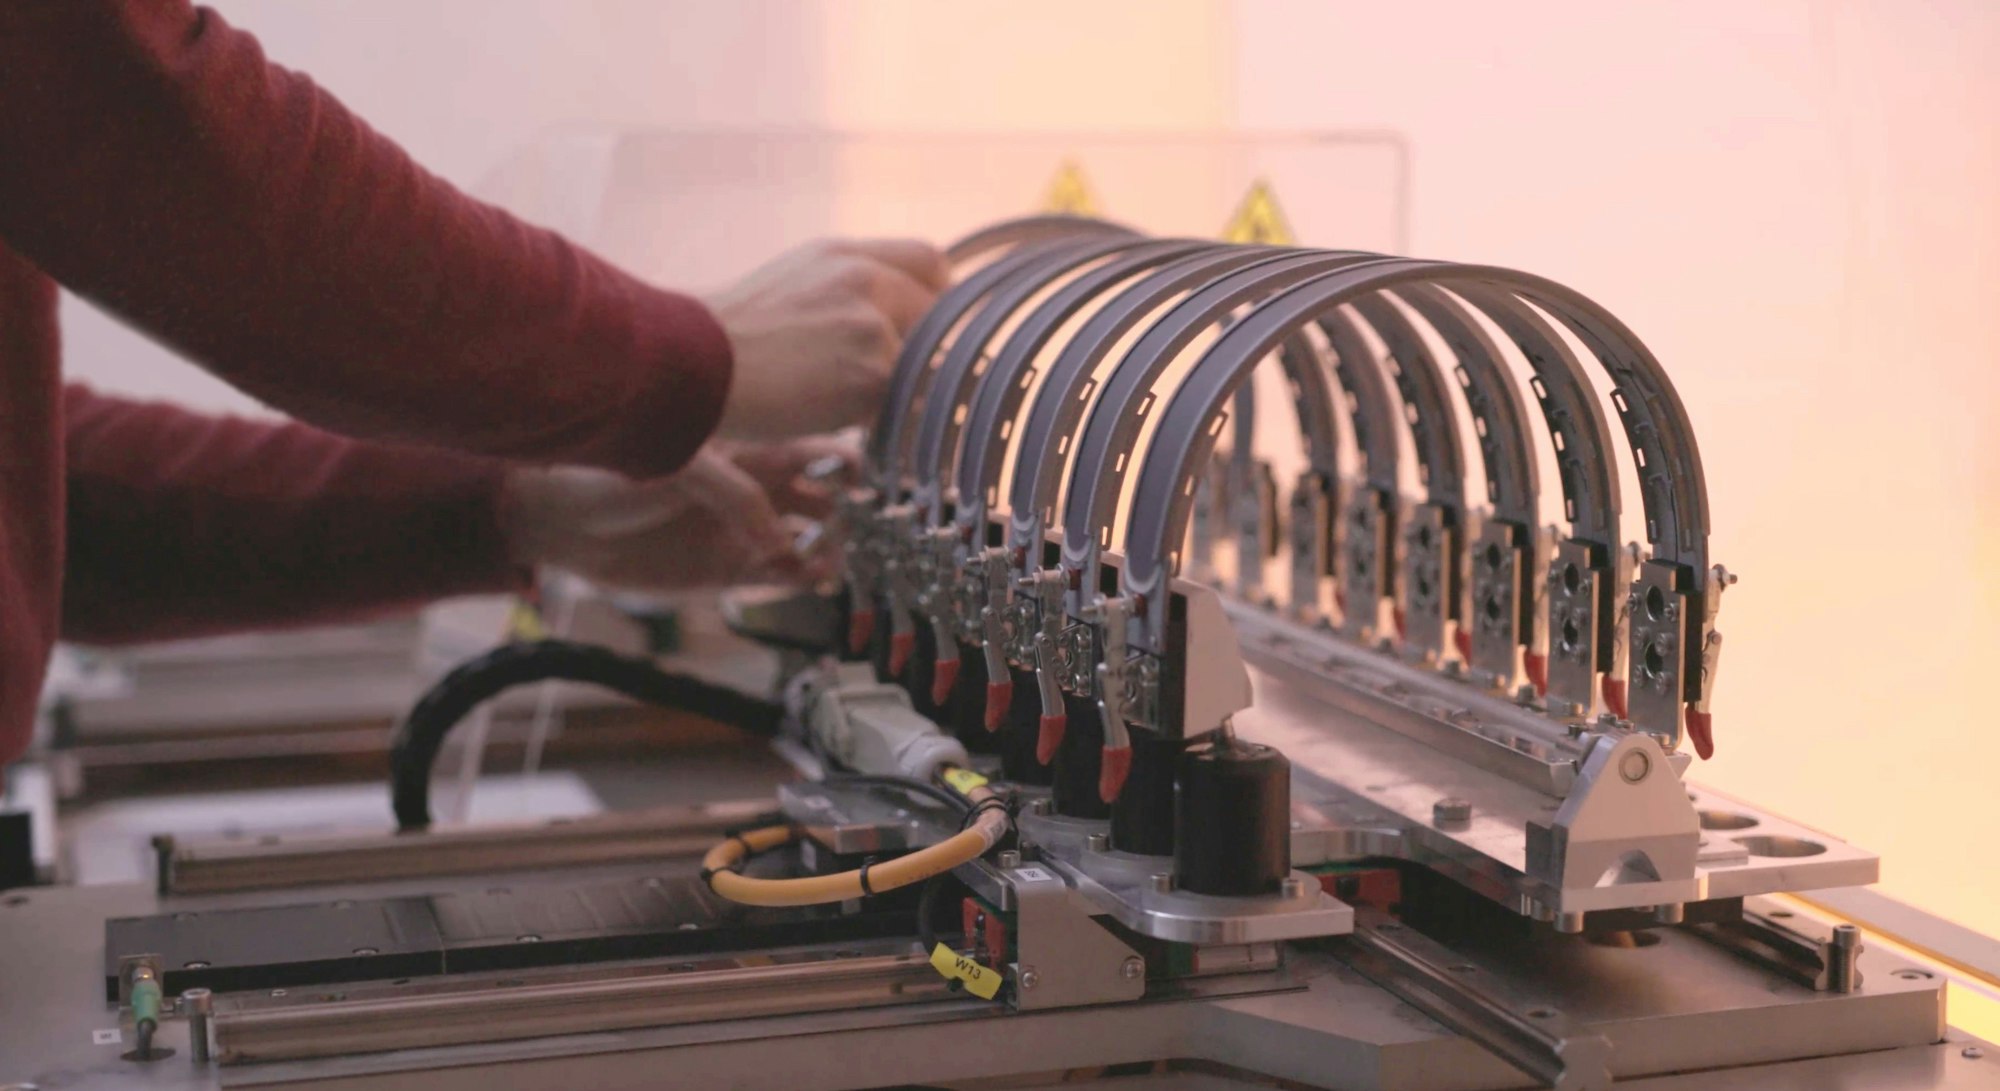 Picture of the bending machine of startup Exeger, making flexible solar panels for gadgets